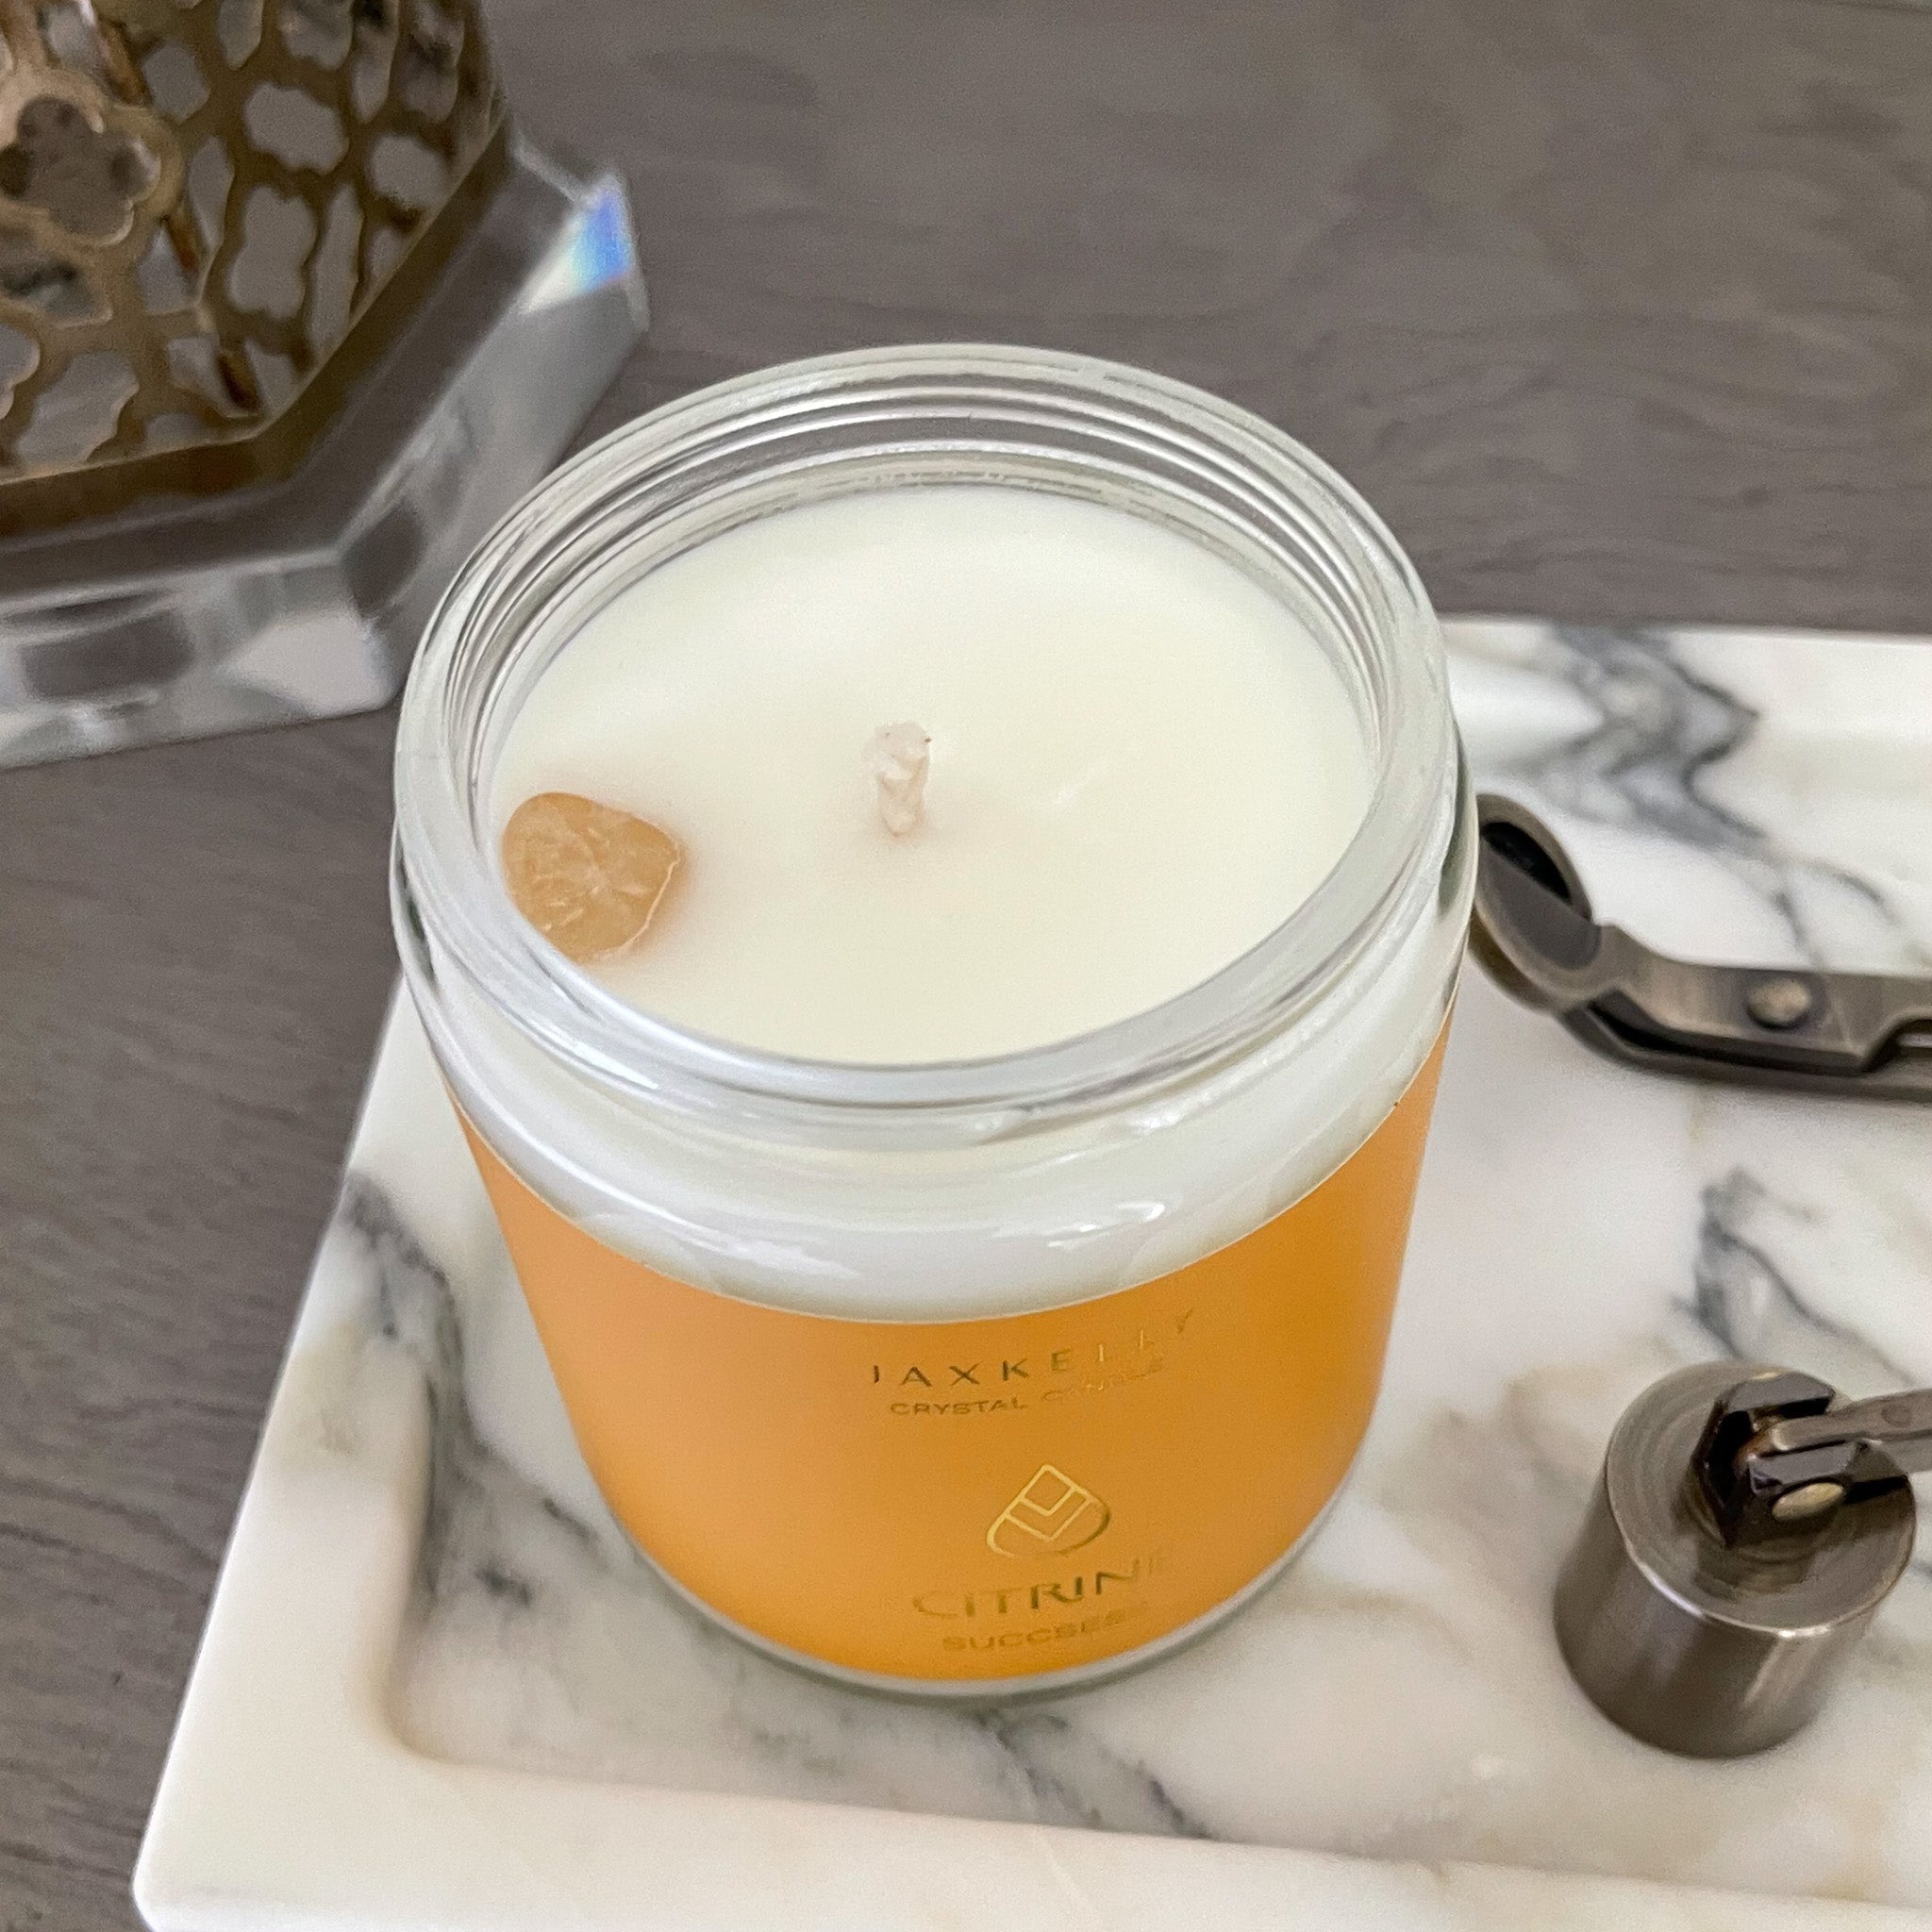 Citrine Crystal Candle, Soy Wax Candle, Hand Poured Candle